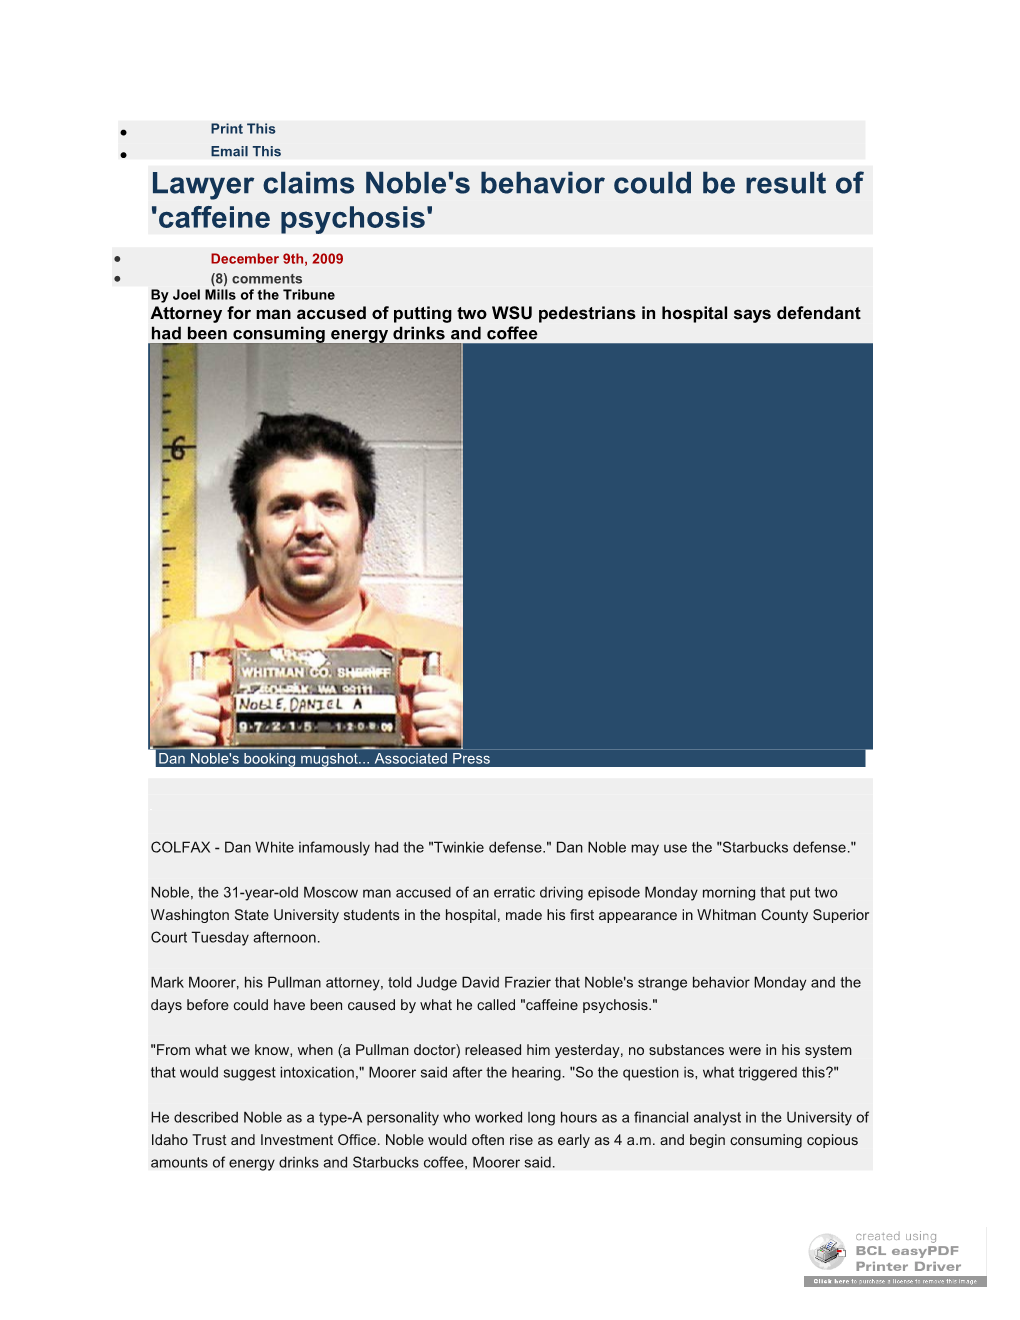 Lawyer Claims Noble's Behavior Could Be Result of 'Caffeine Psychosis'